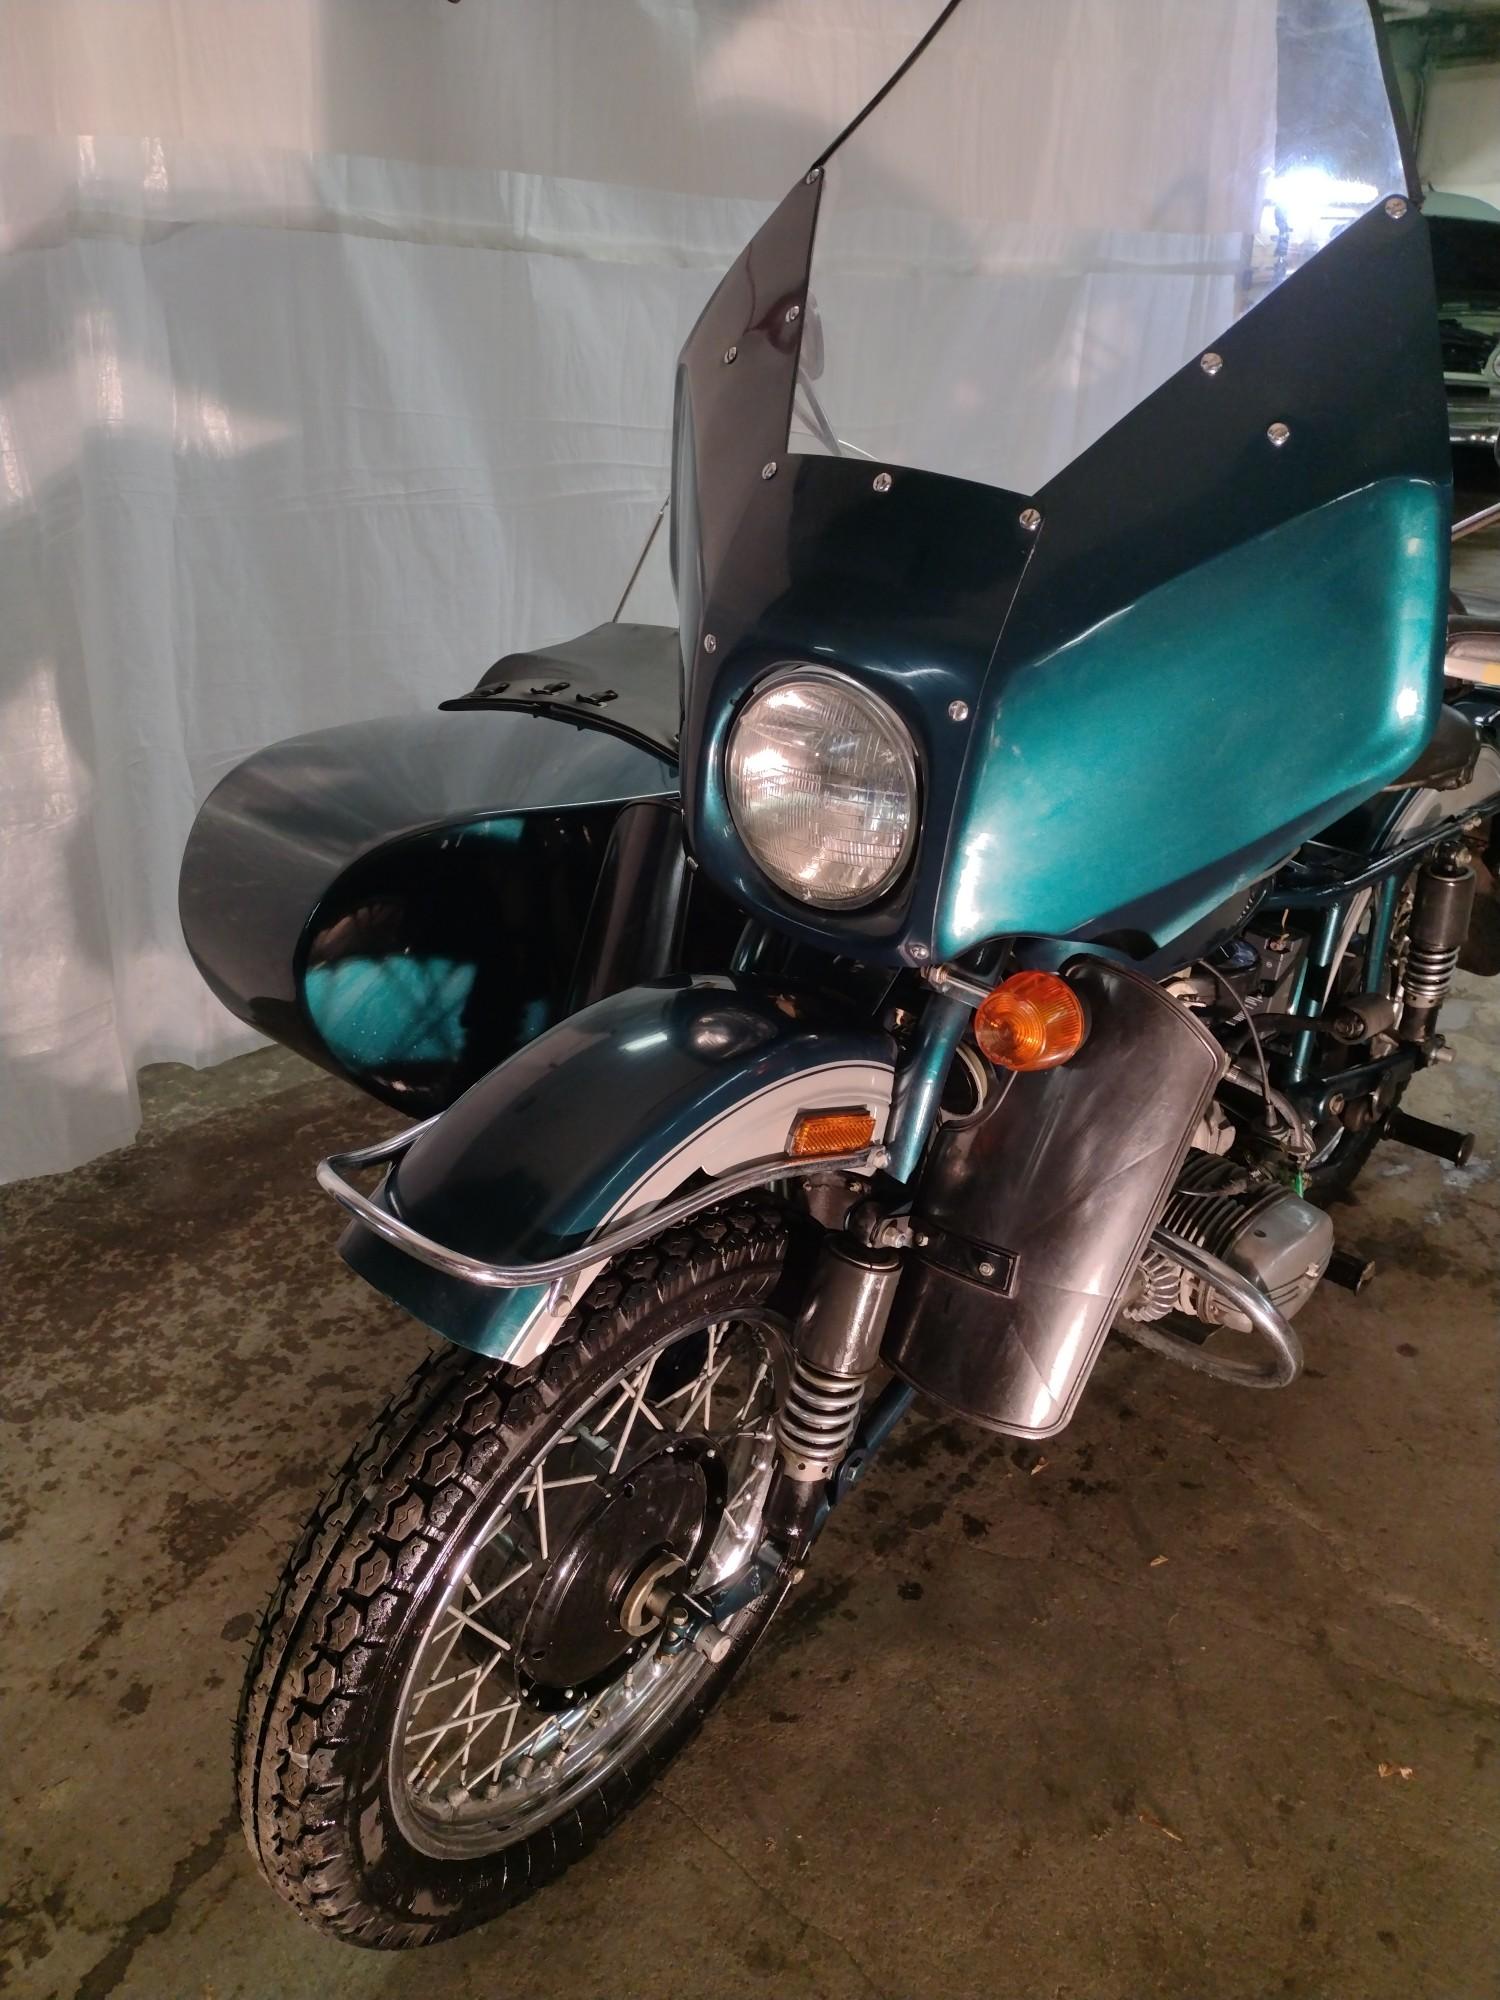 Motorcycle 2001 URAL with side car